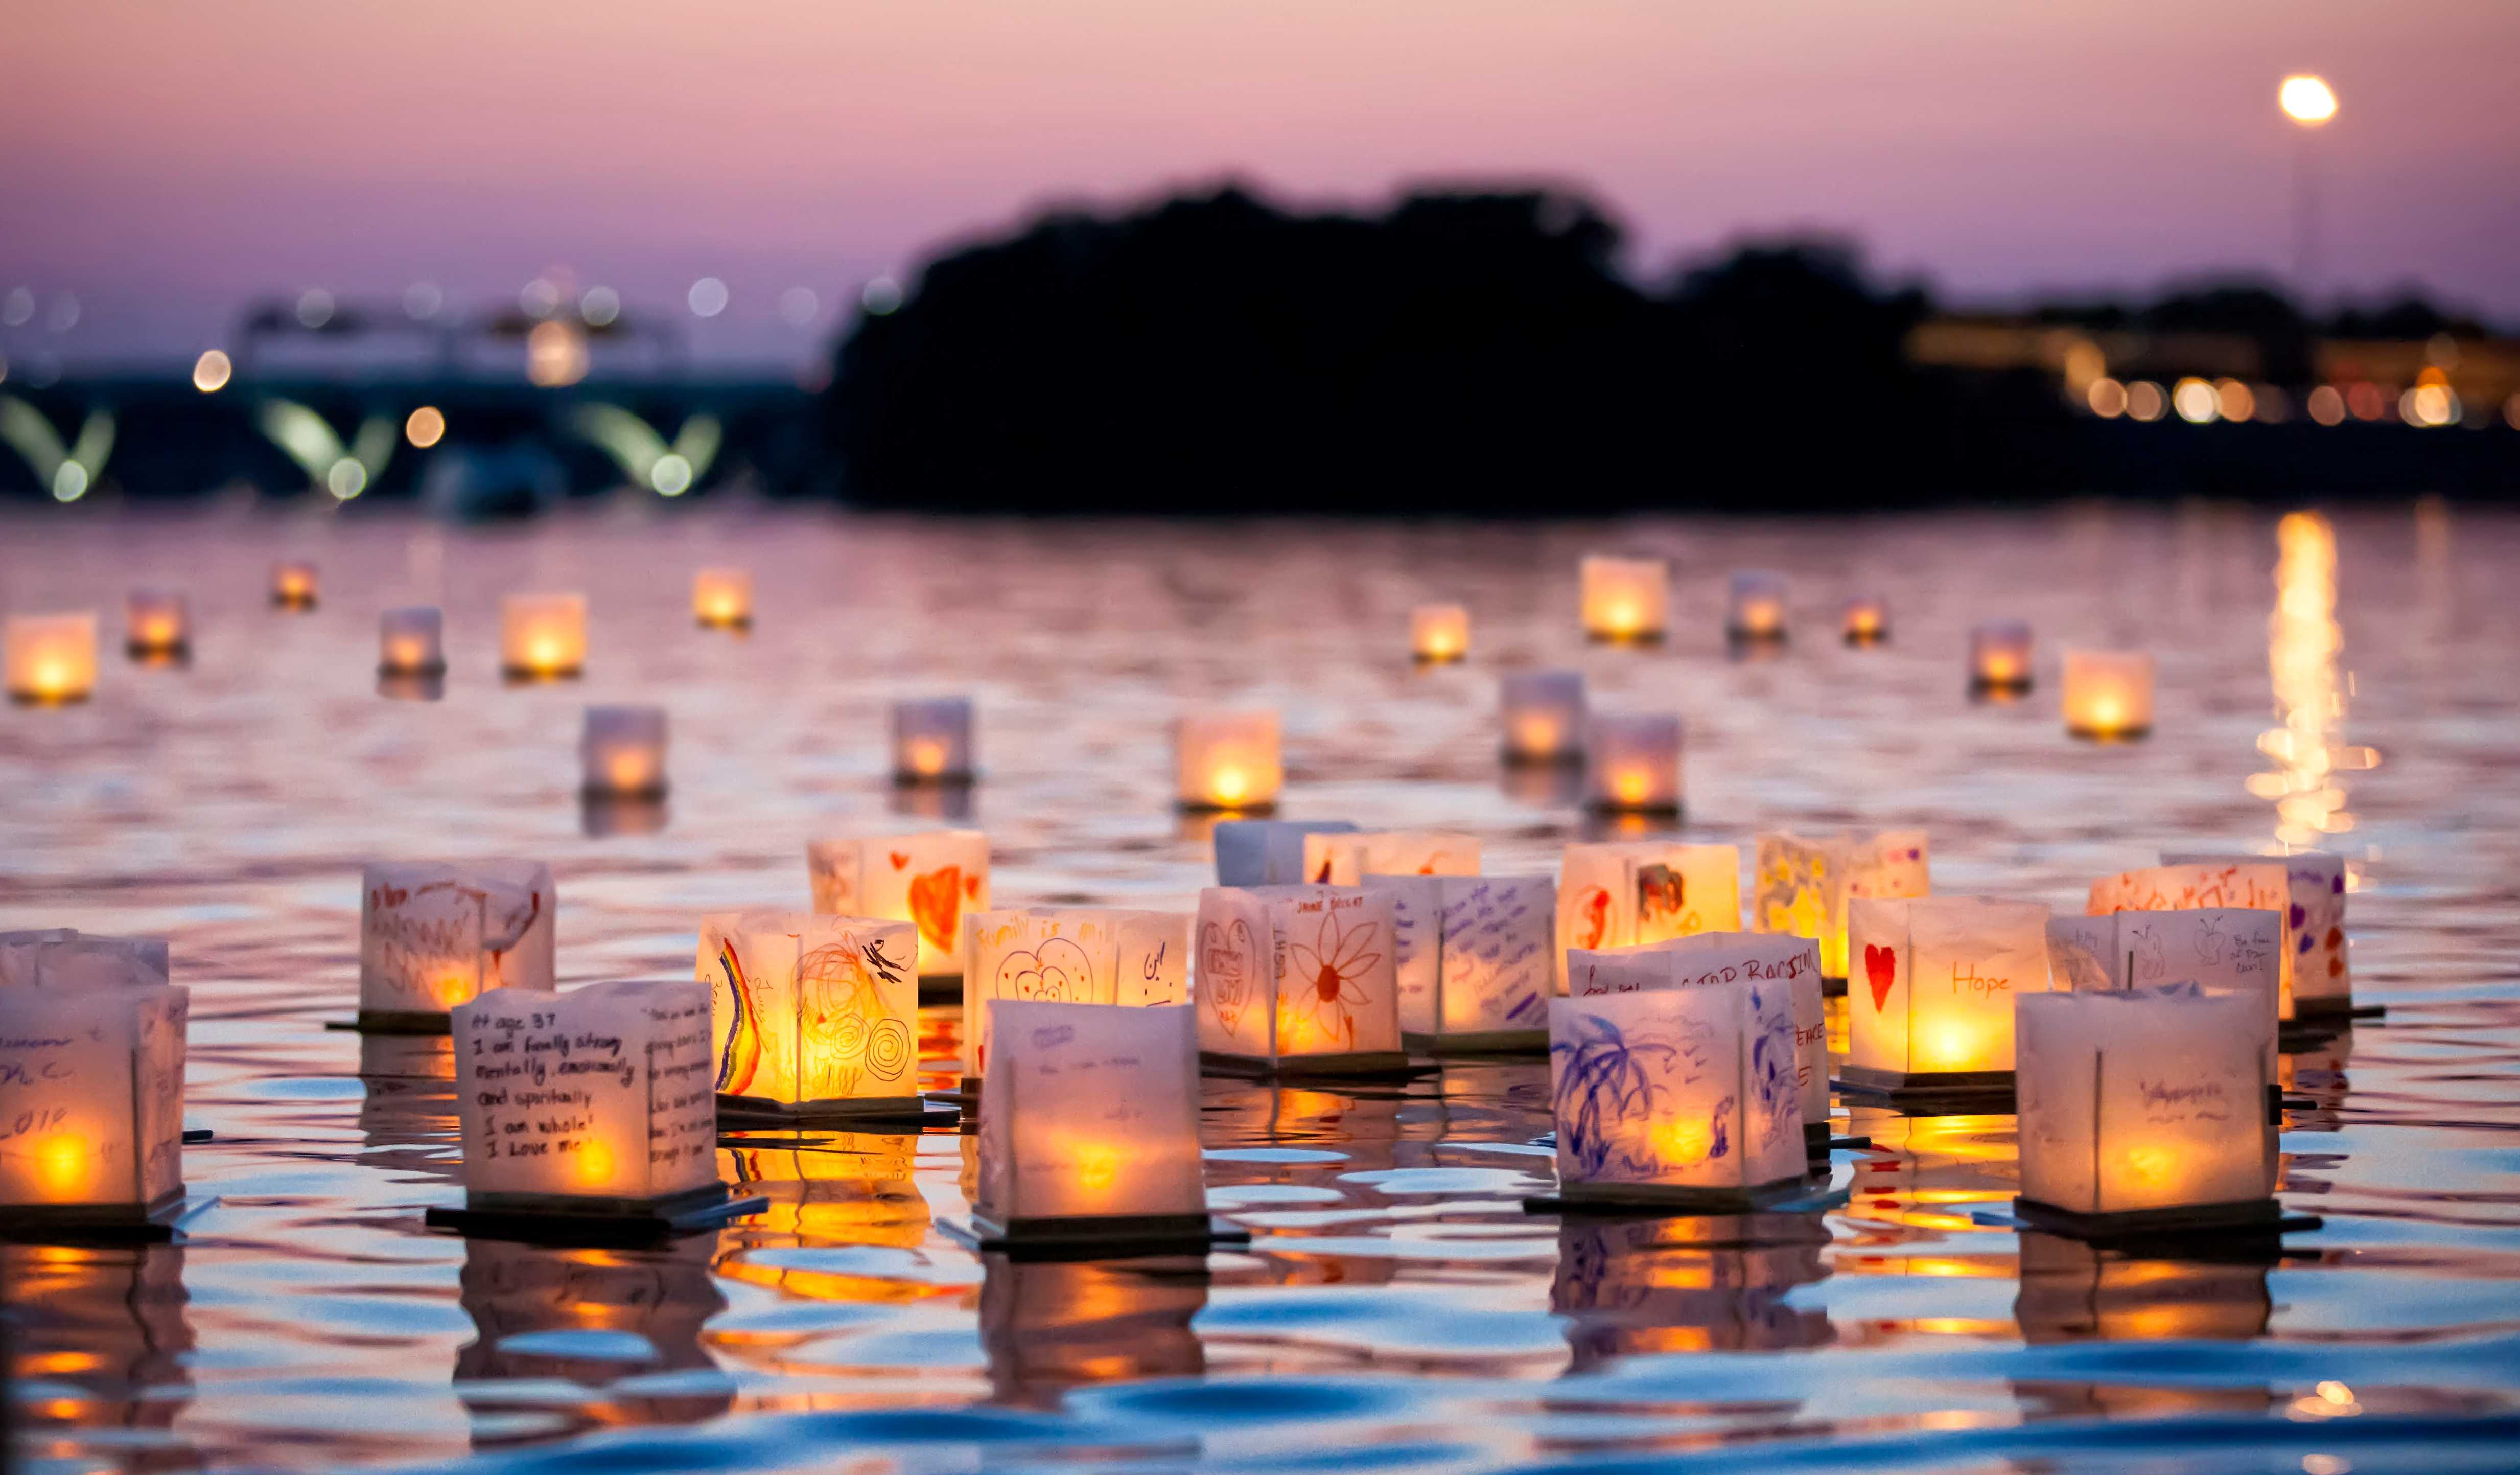 Water lantern festival set to shimmer this summer at Louisville's